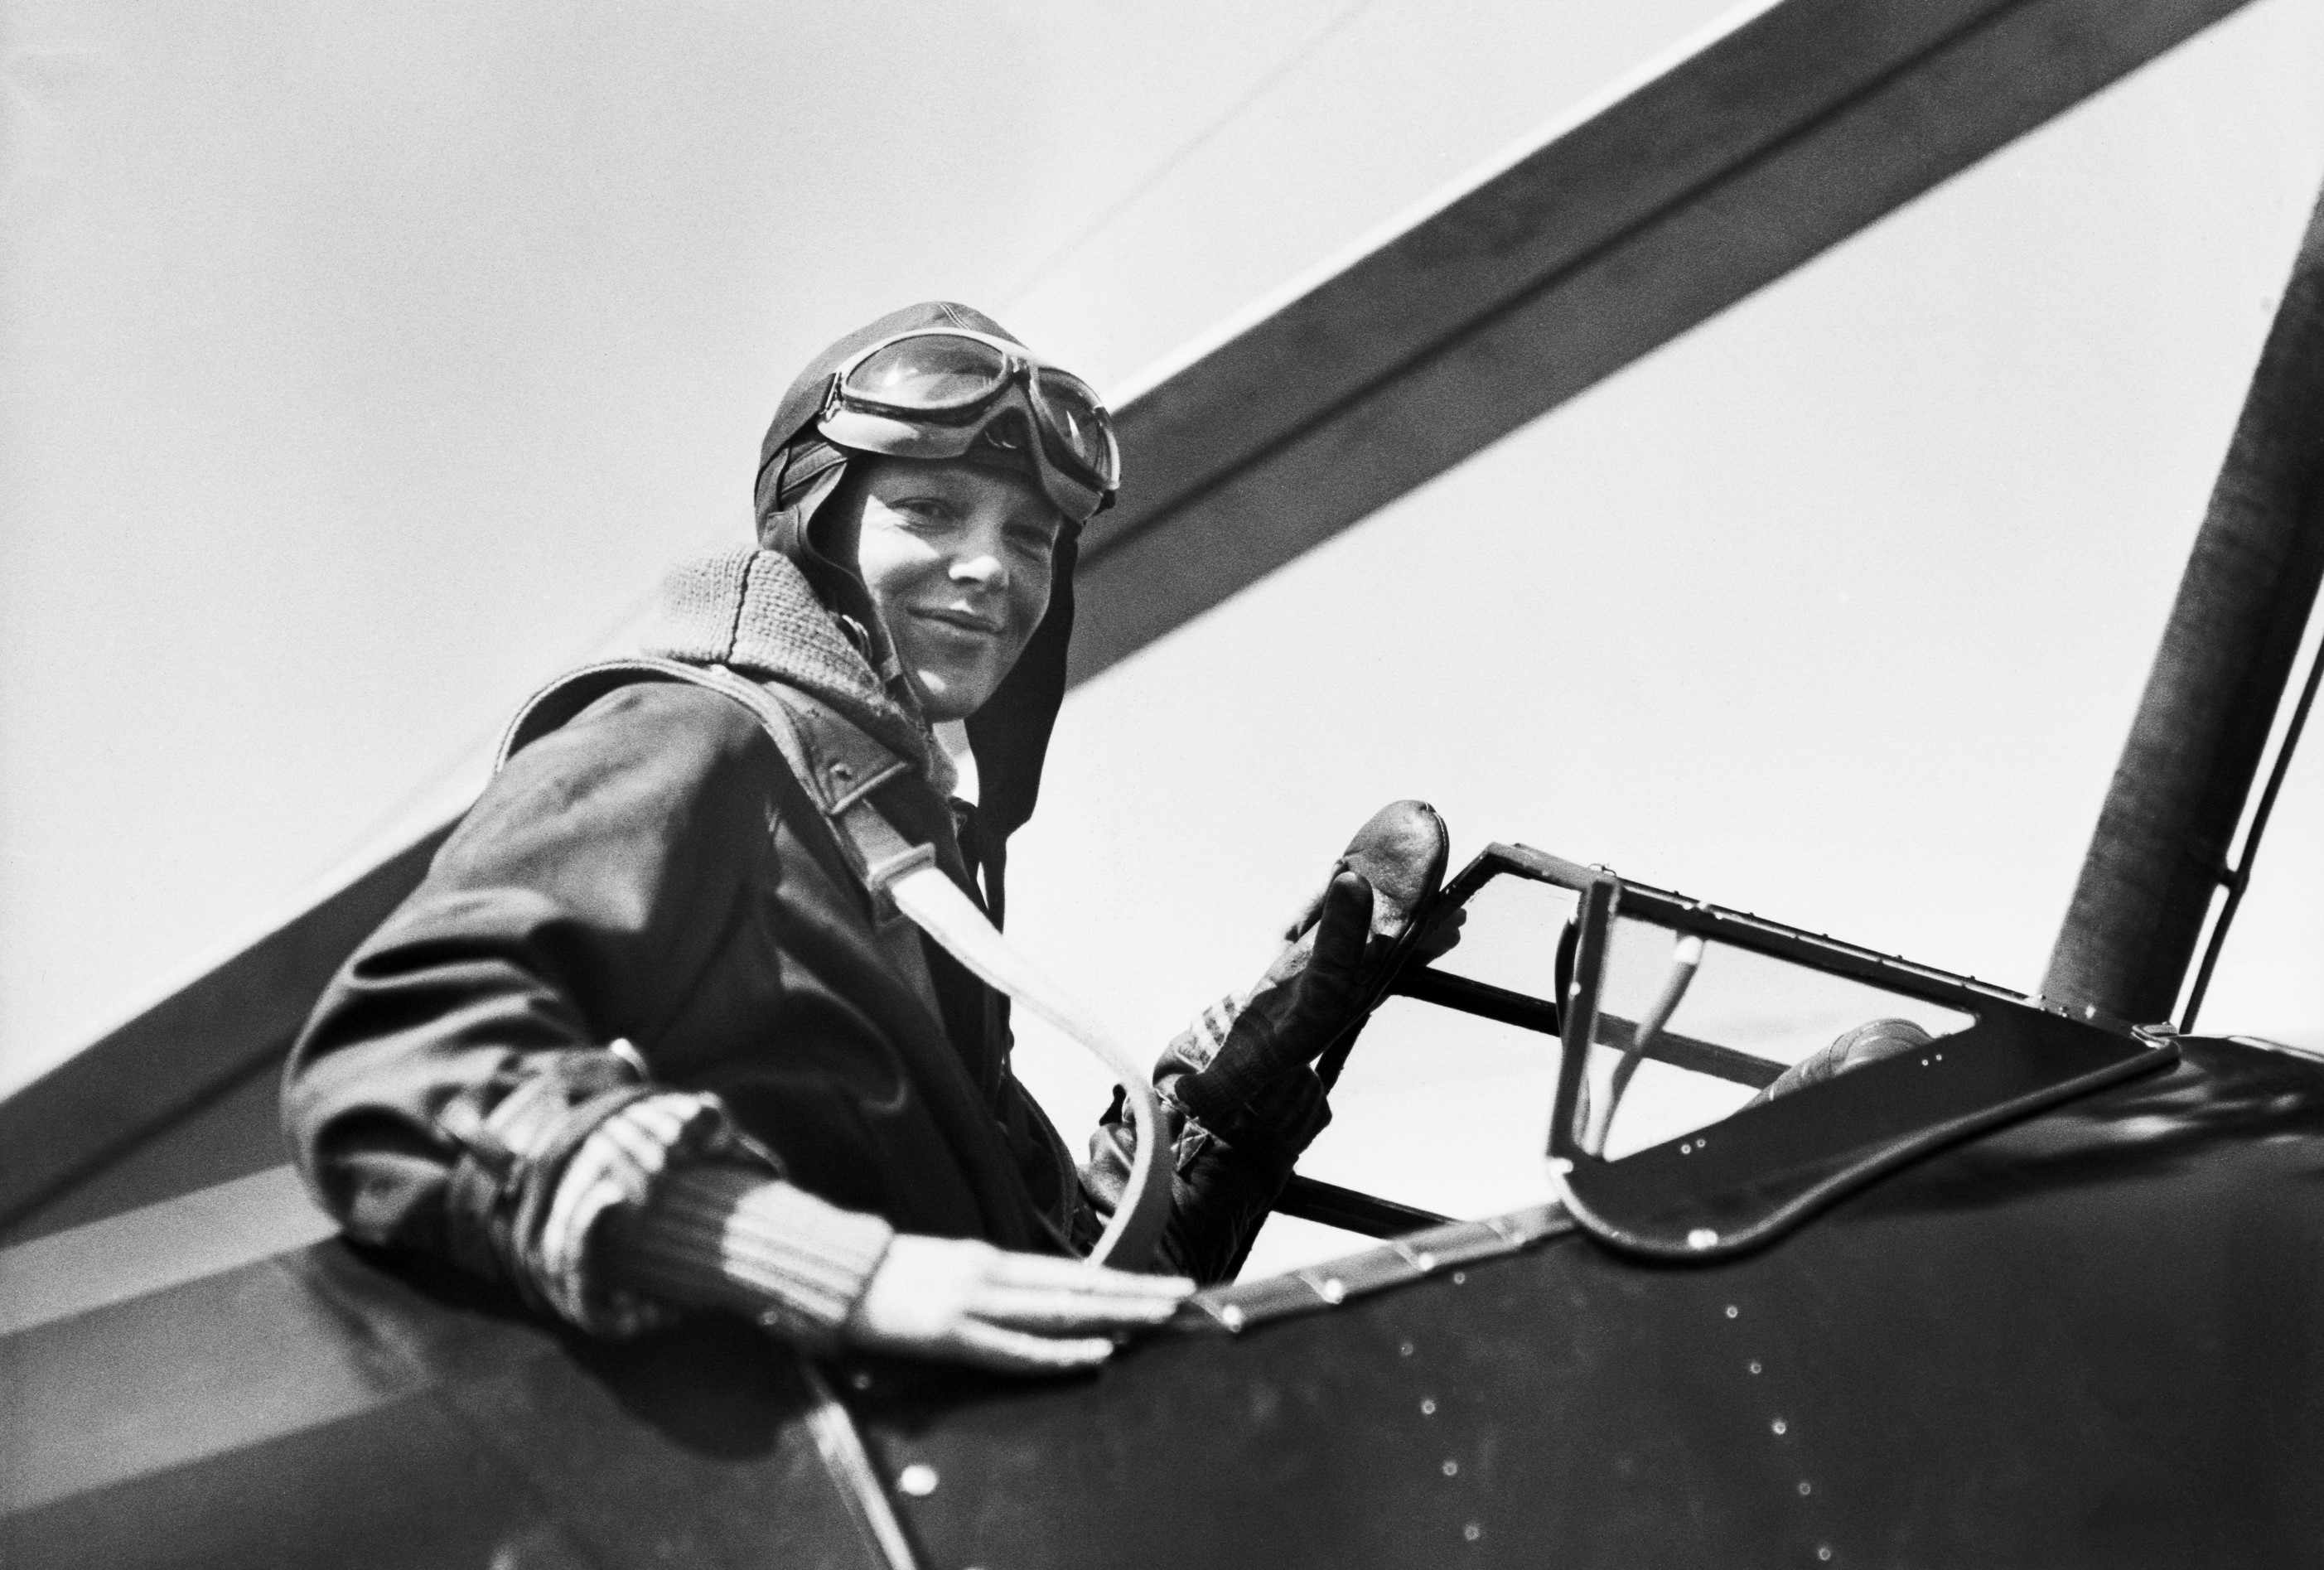 Amelia Earhart and the bizarre "hollow earth" conspiracy theory about